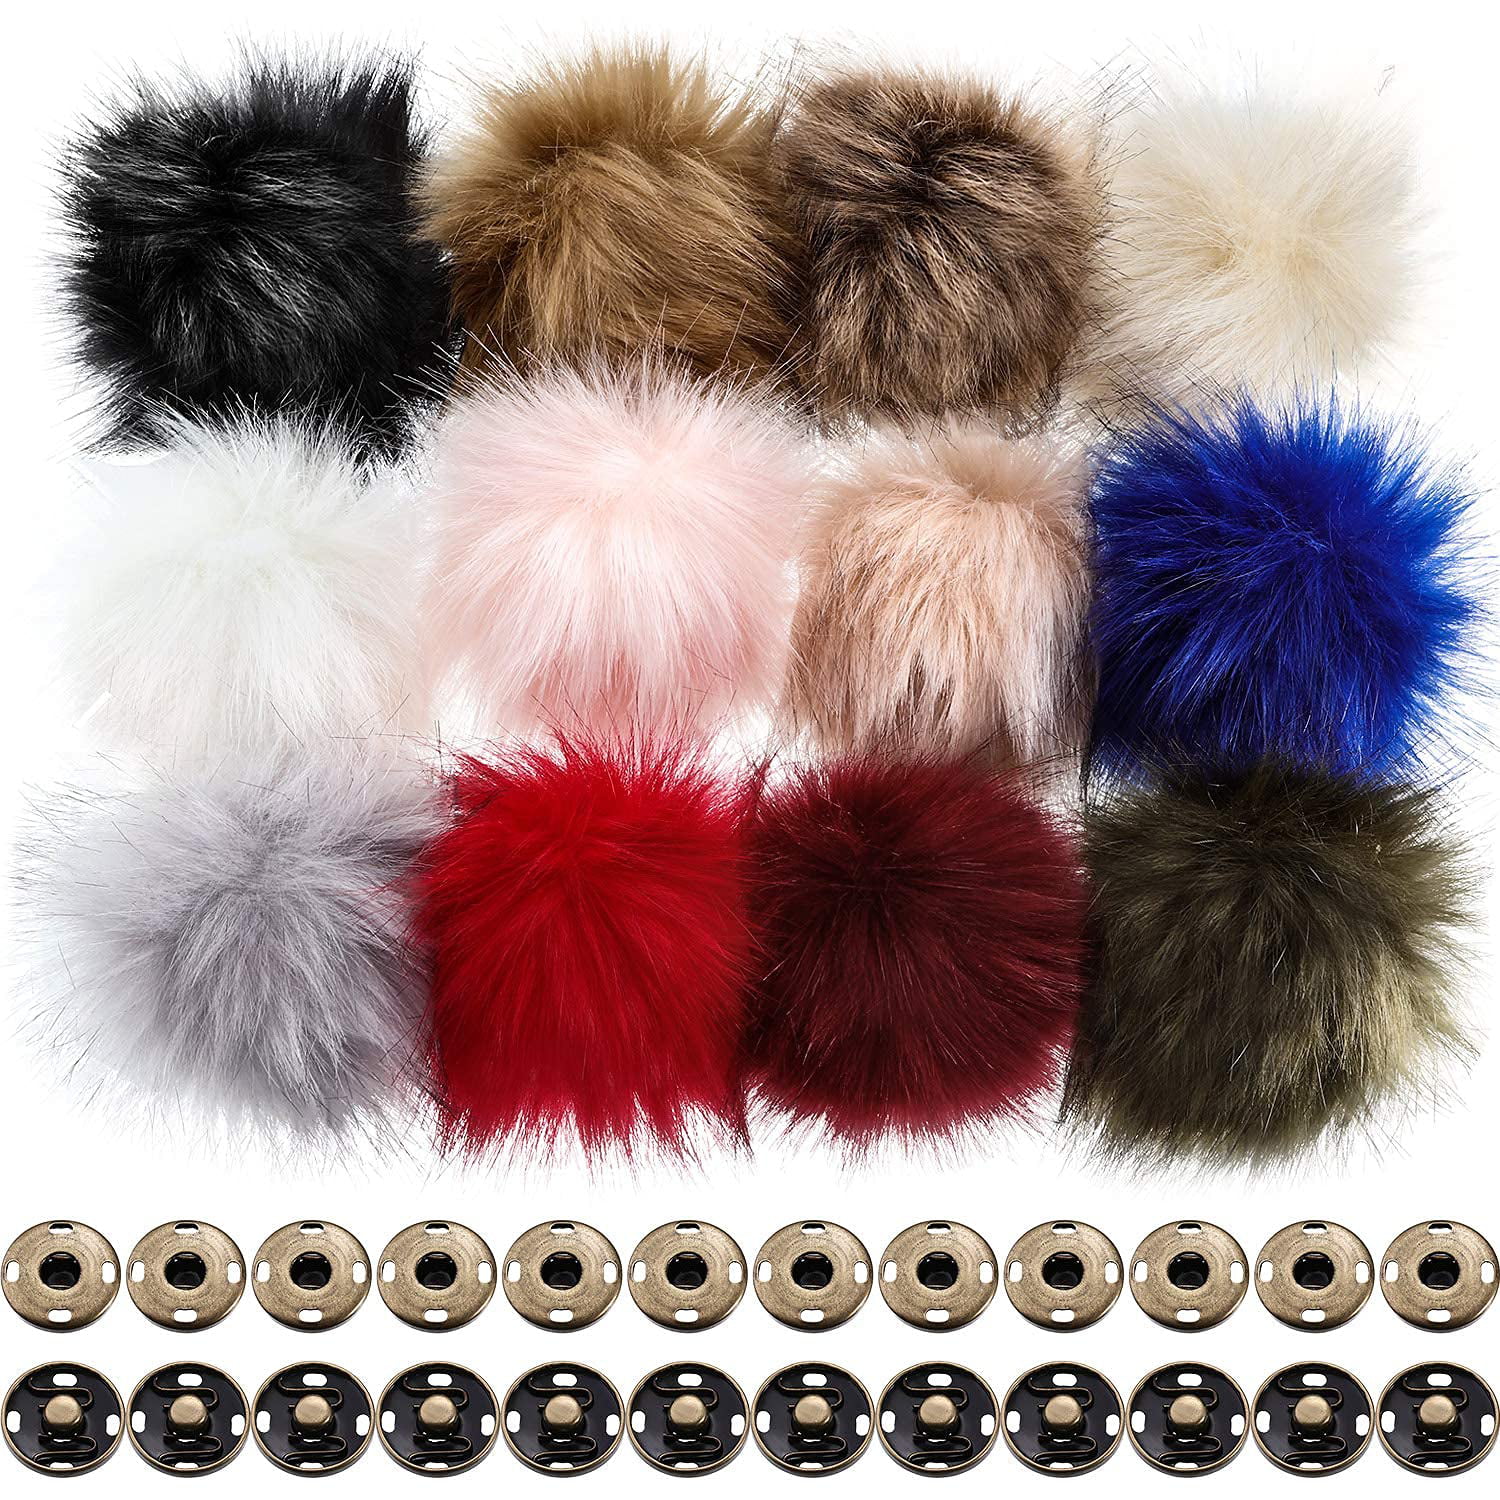 12 Pieces Faux Fur Fluffy Pompom Ball with Removable Press Button for Detachable Knit Hats Clothing Accessories 